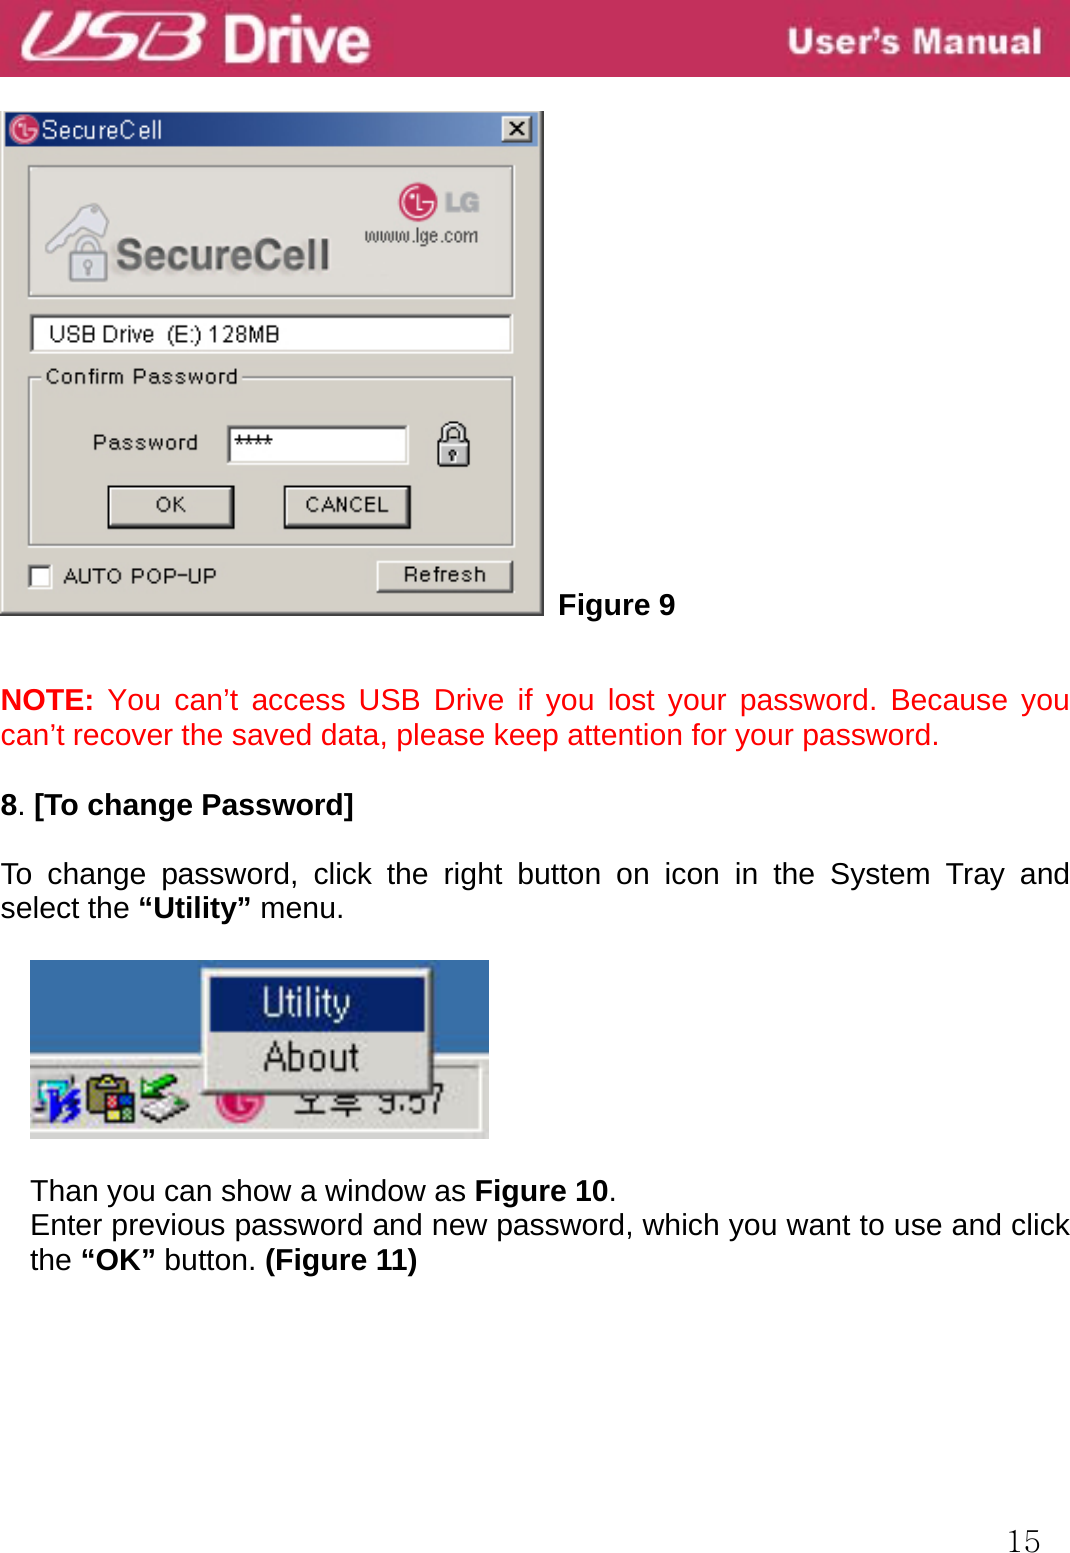  15   Figure 9  NOTE: You can’t access USB Drive if you lost your password. Because you can’t recover the saved data, please keep attention for your password.  8. [To change Password]  To change password, click the right button on icon in the System Tray and select the “Utility” menu.    Than you can show a window as Figure 10. Enter previous password and new password, which you want to use and click the “OK” button. (Figure 11)     